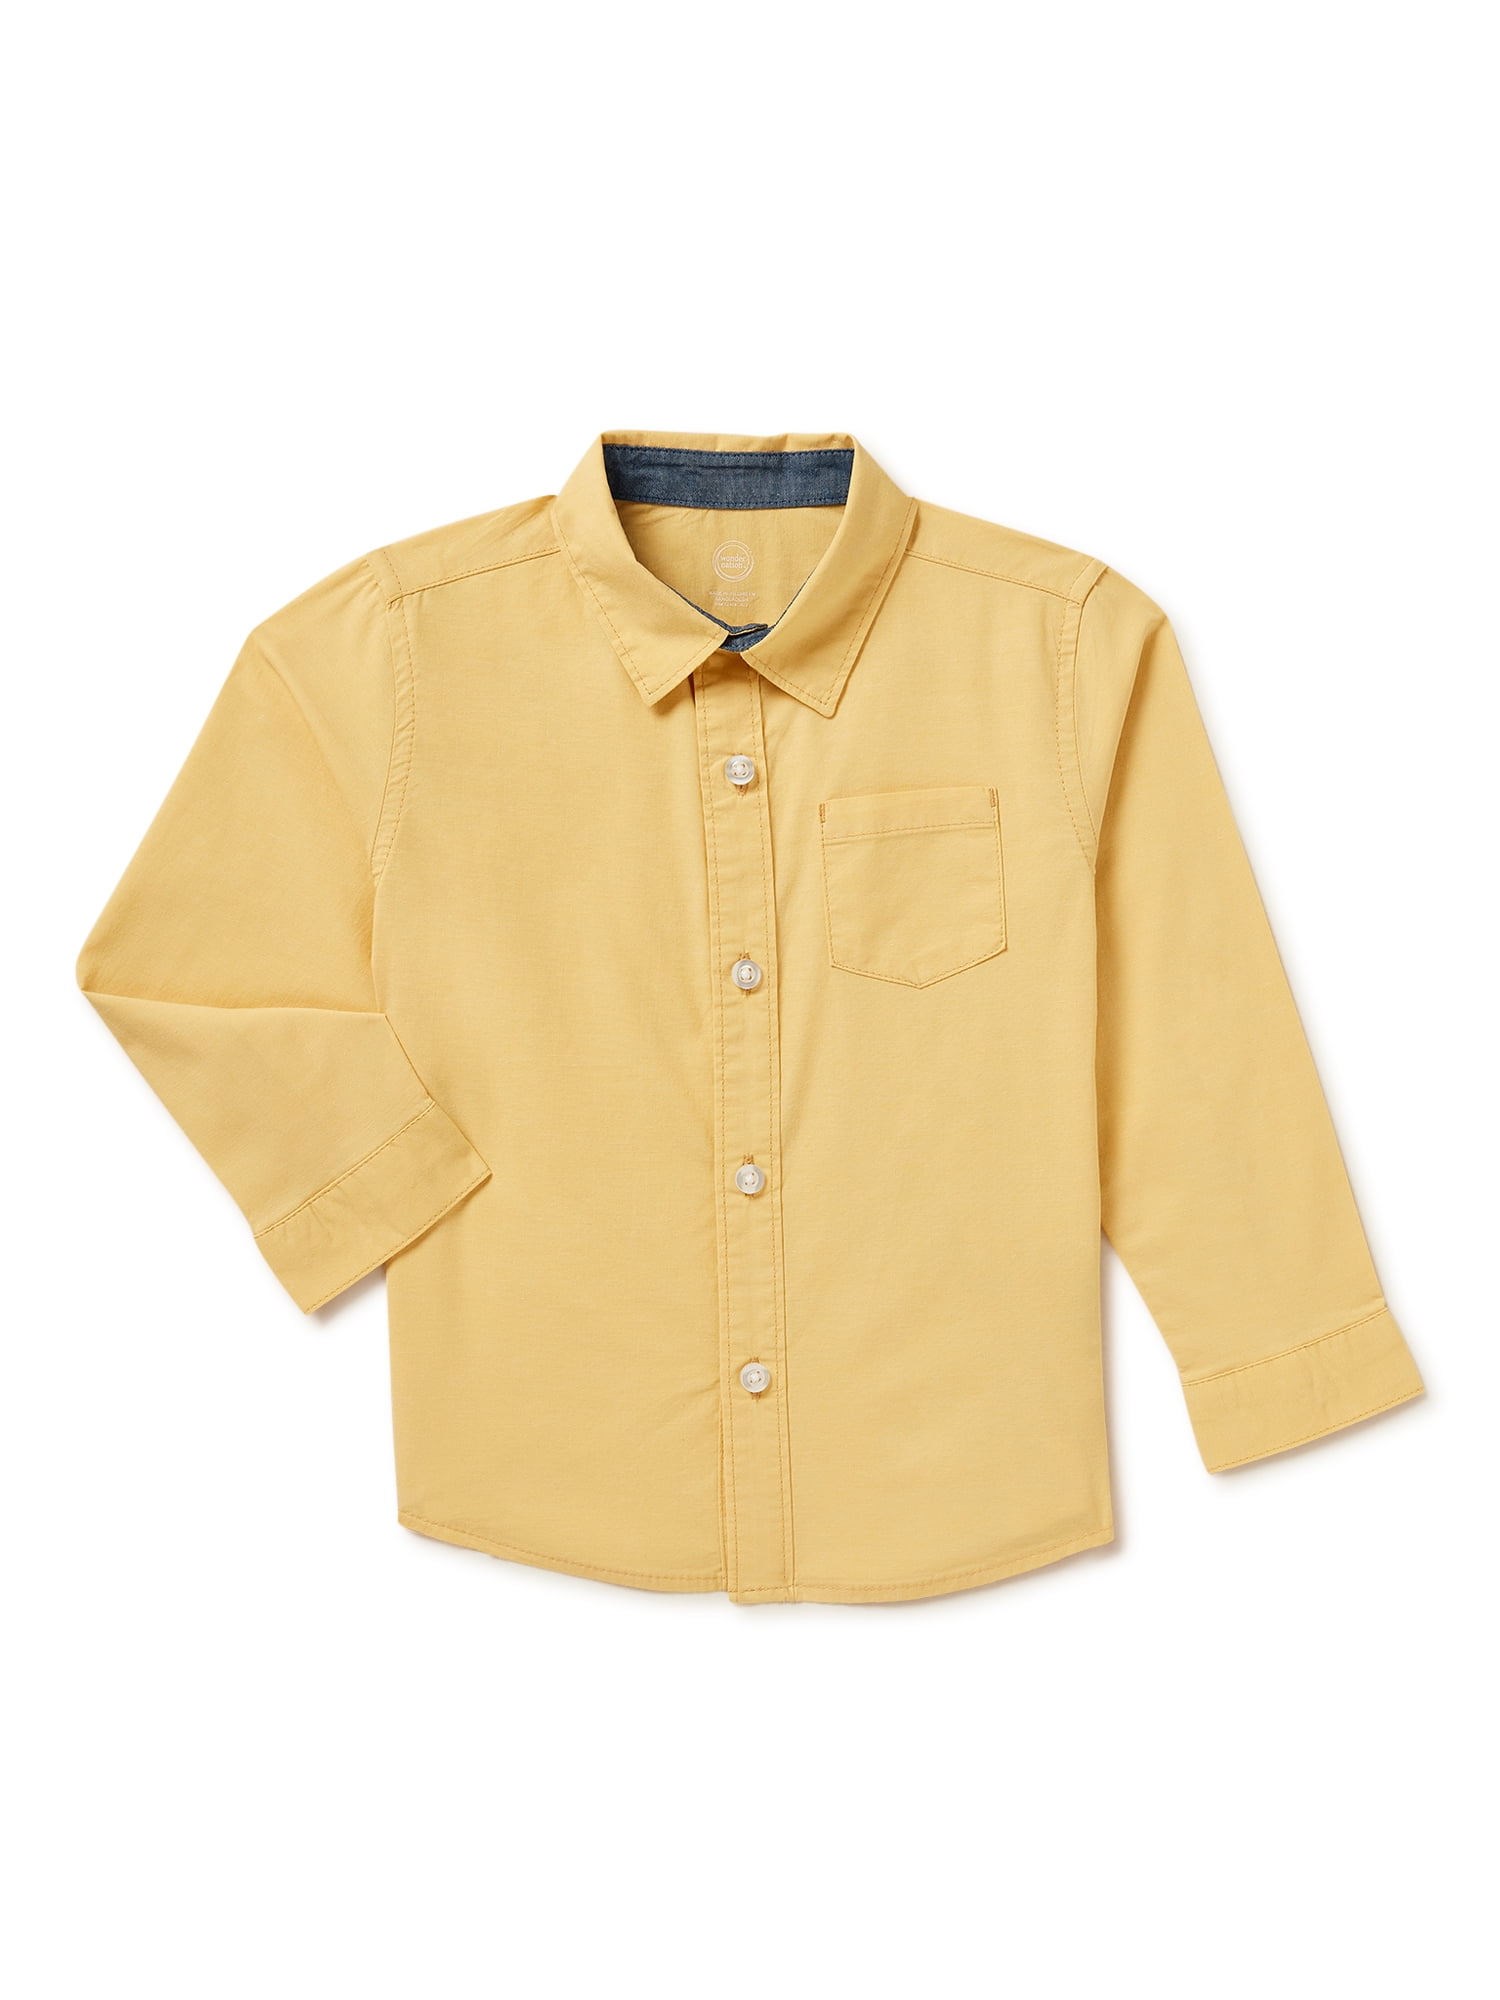 Wonder Nation Toddler Boys Woven Shirt with Long Sleeves, Sizes 12M-5T ...